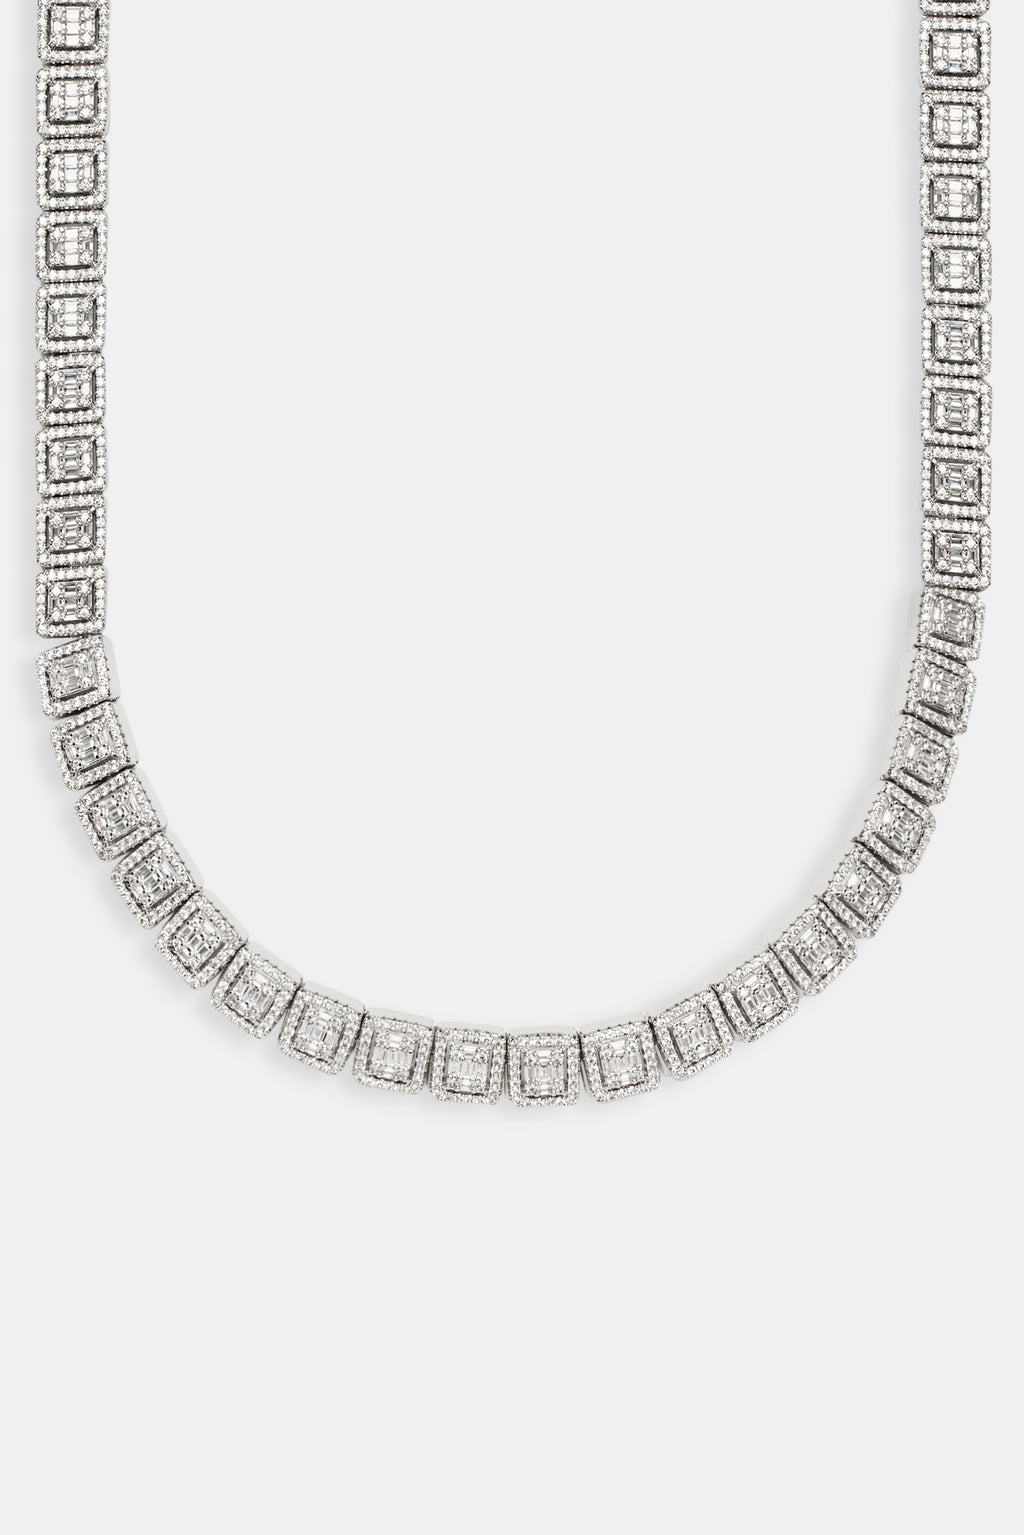 CLUSTERED TENNIS CHAIN [WHITE GOLD 10mm] – TheDripBox.